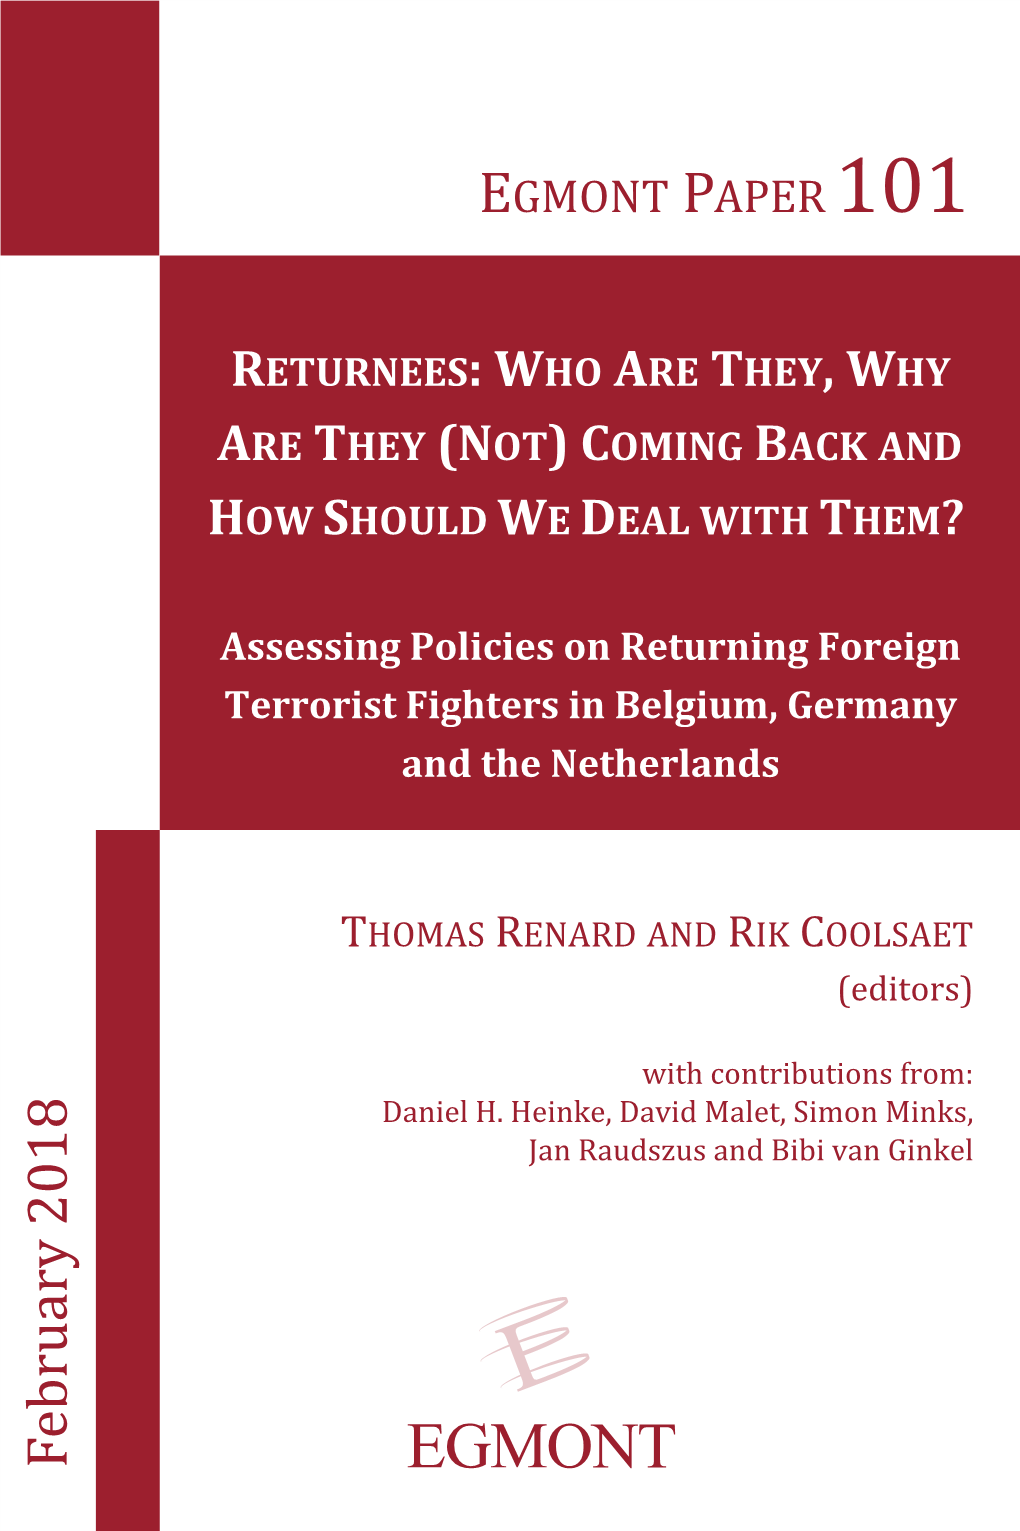 Returnees: Who Are They, Why Are They (Not) Coming Back and How Should We Deal with Them?